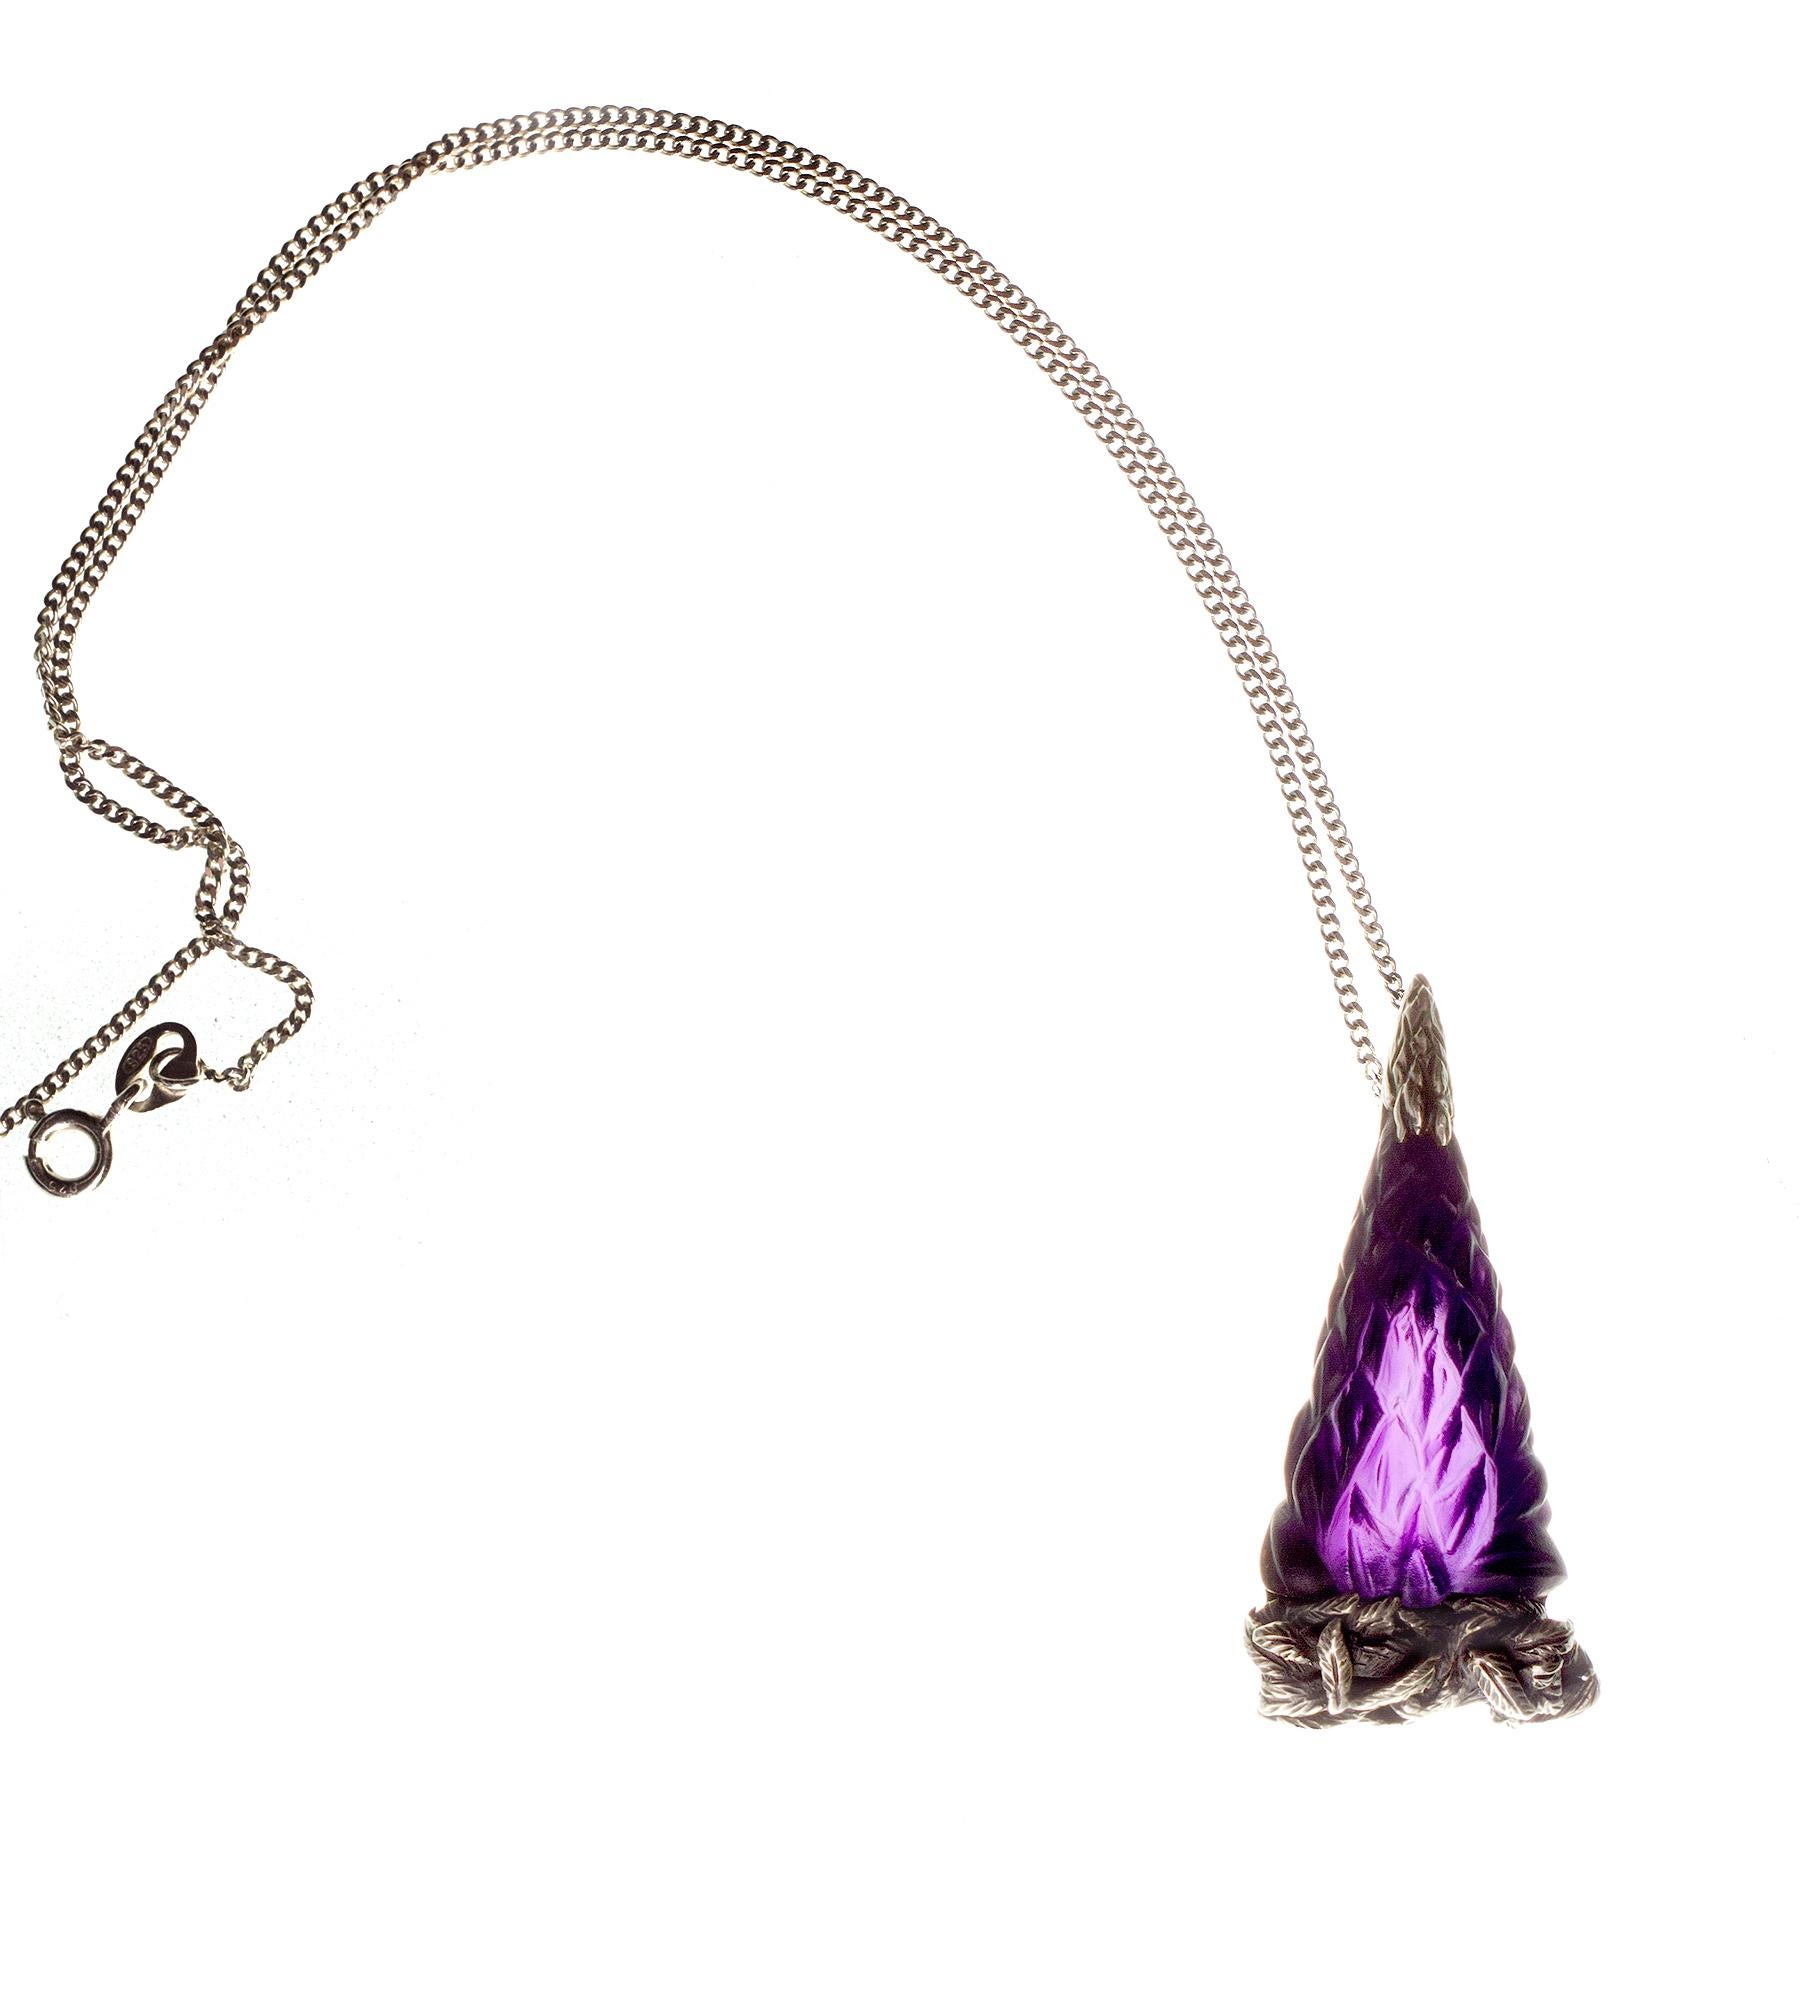 This Lupine pendant is an homage and our love letter to the brightest star, incomparable René Lalique. 

The jewel is made with cut purple amethyst in the shape of lupine buds. This designer pendant in dark silver looks a little bit gothic and